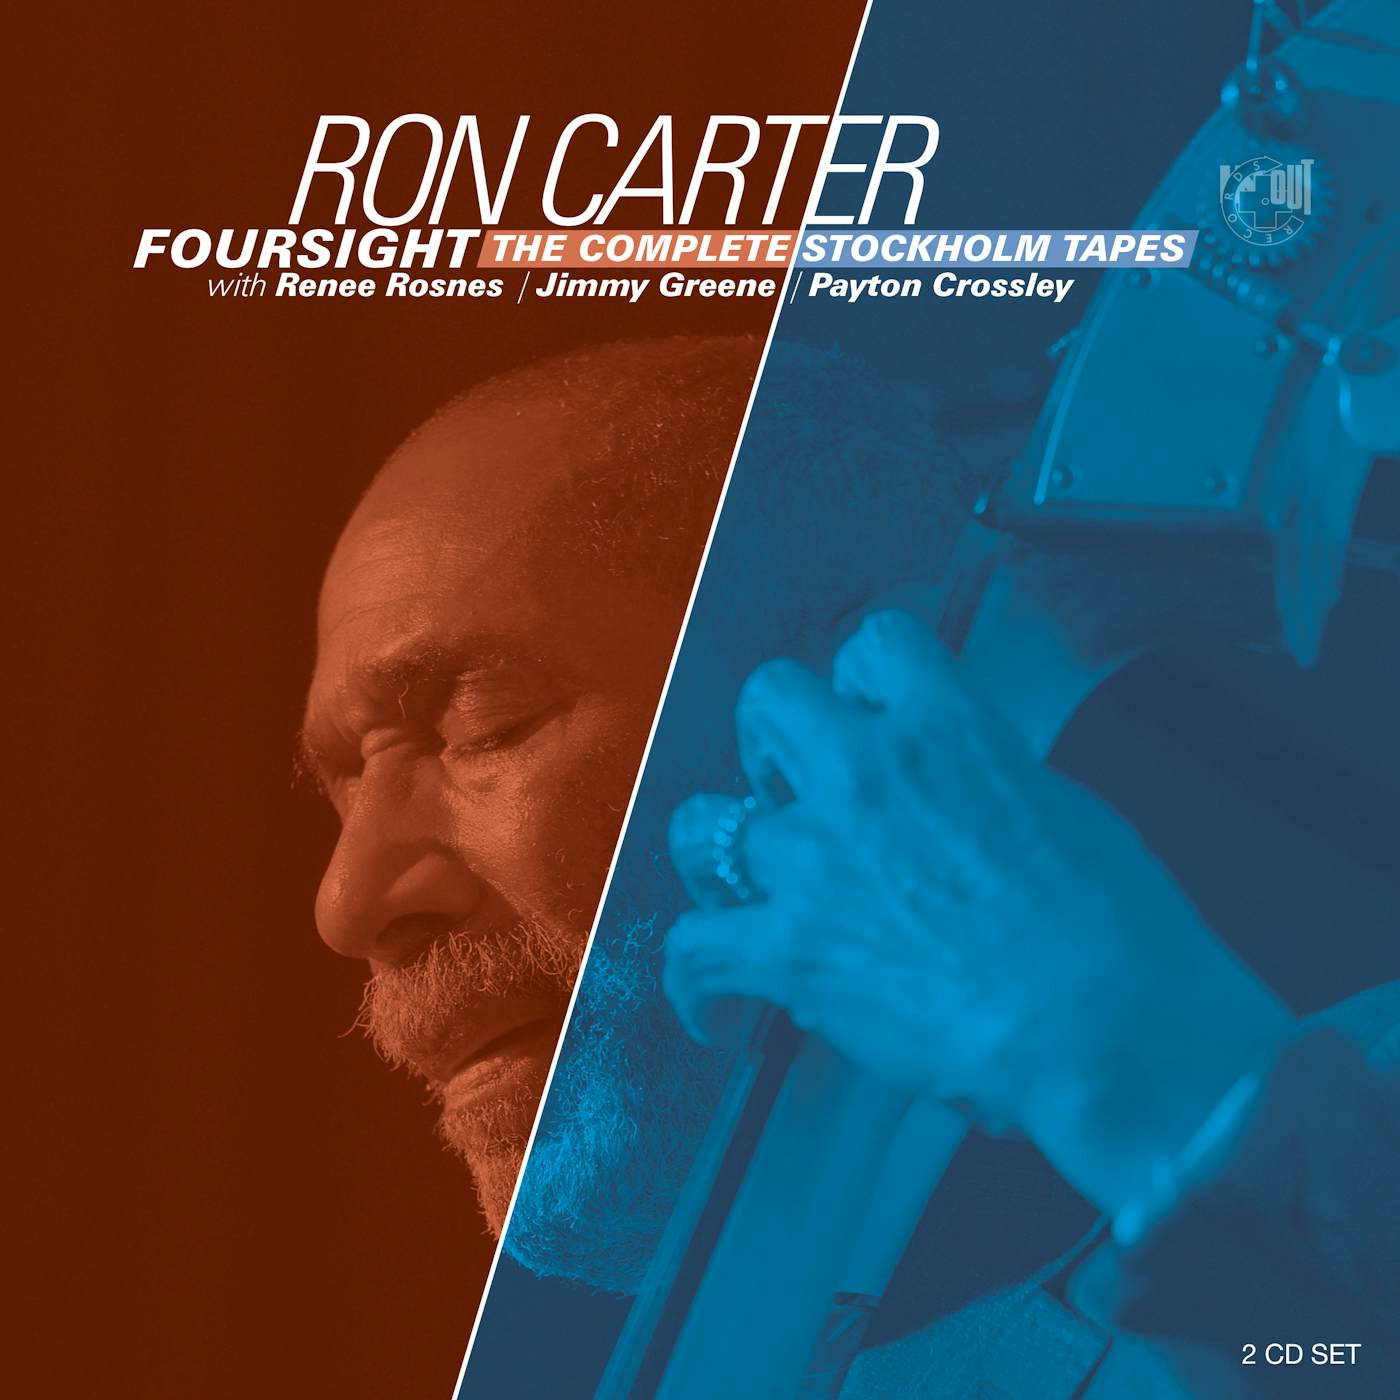 Ron Carter FOURSIGHT:THE COMPLETE STOCKHOLM TAPES CD